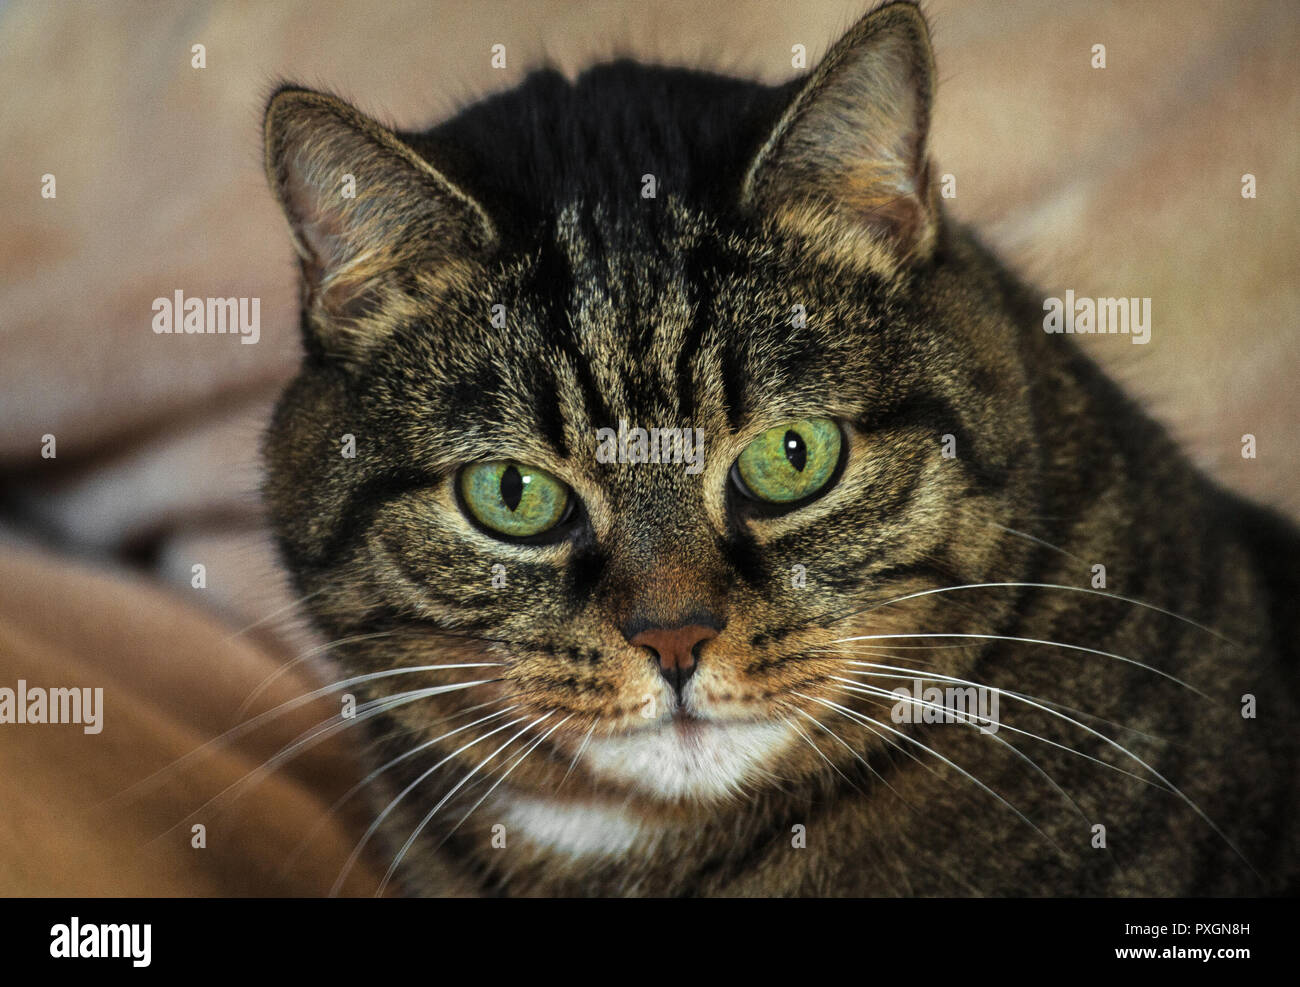 an adult mongrel cat female, huge green eyes and striped color, brown shades with black, lying on a light beige rug, orange nose, small ears, Stock Photo